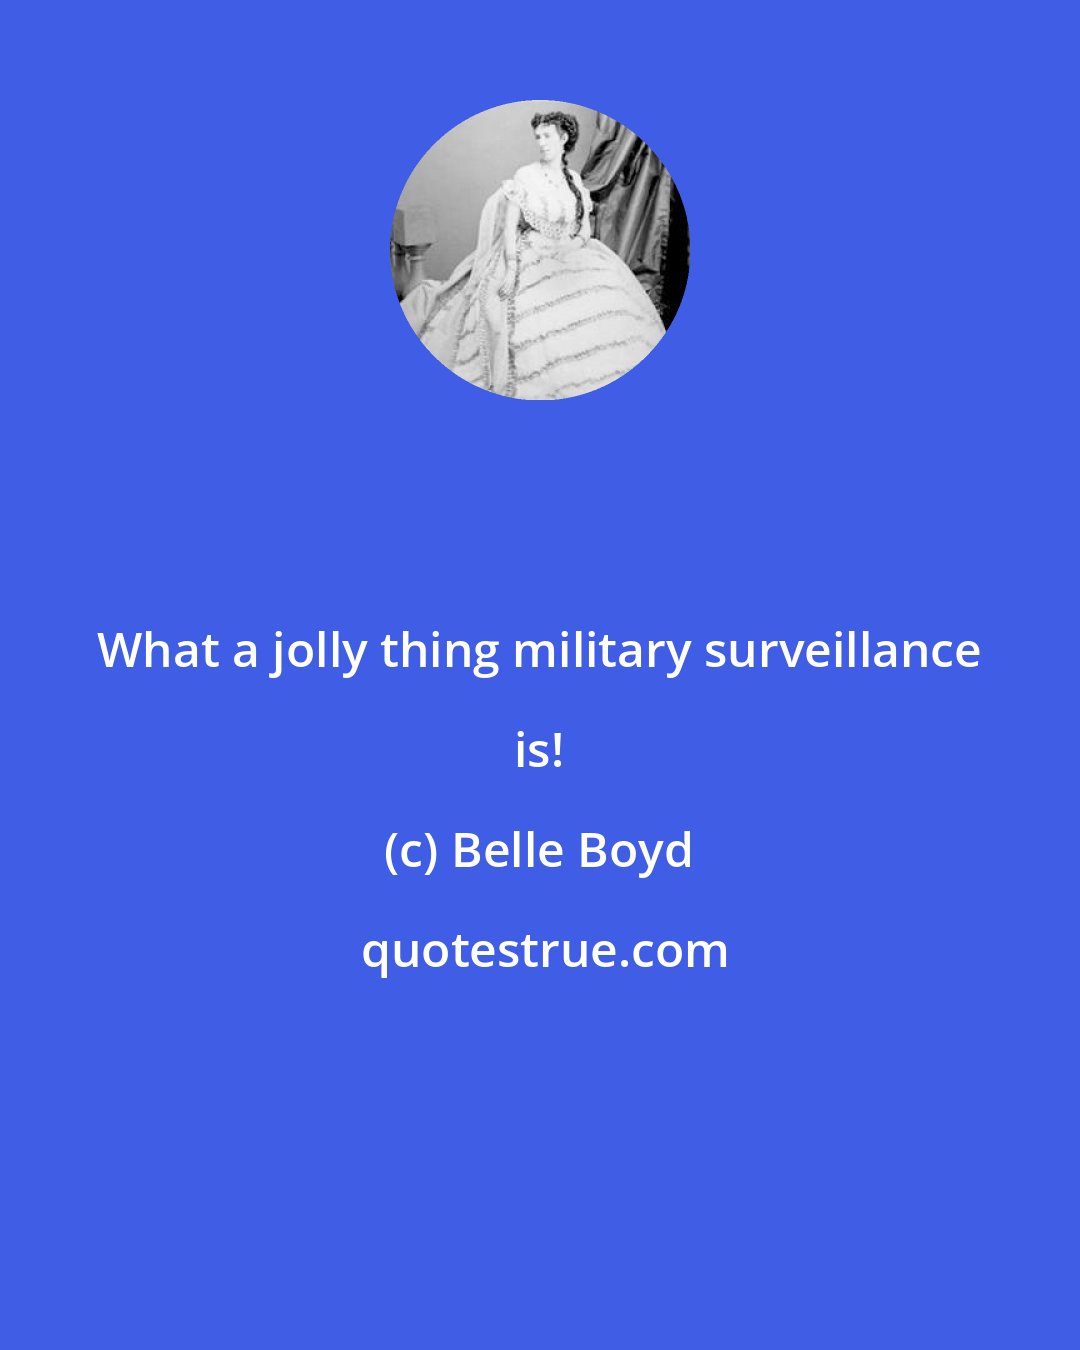 Belle Boyd: What a jolly thing military surveillance is!